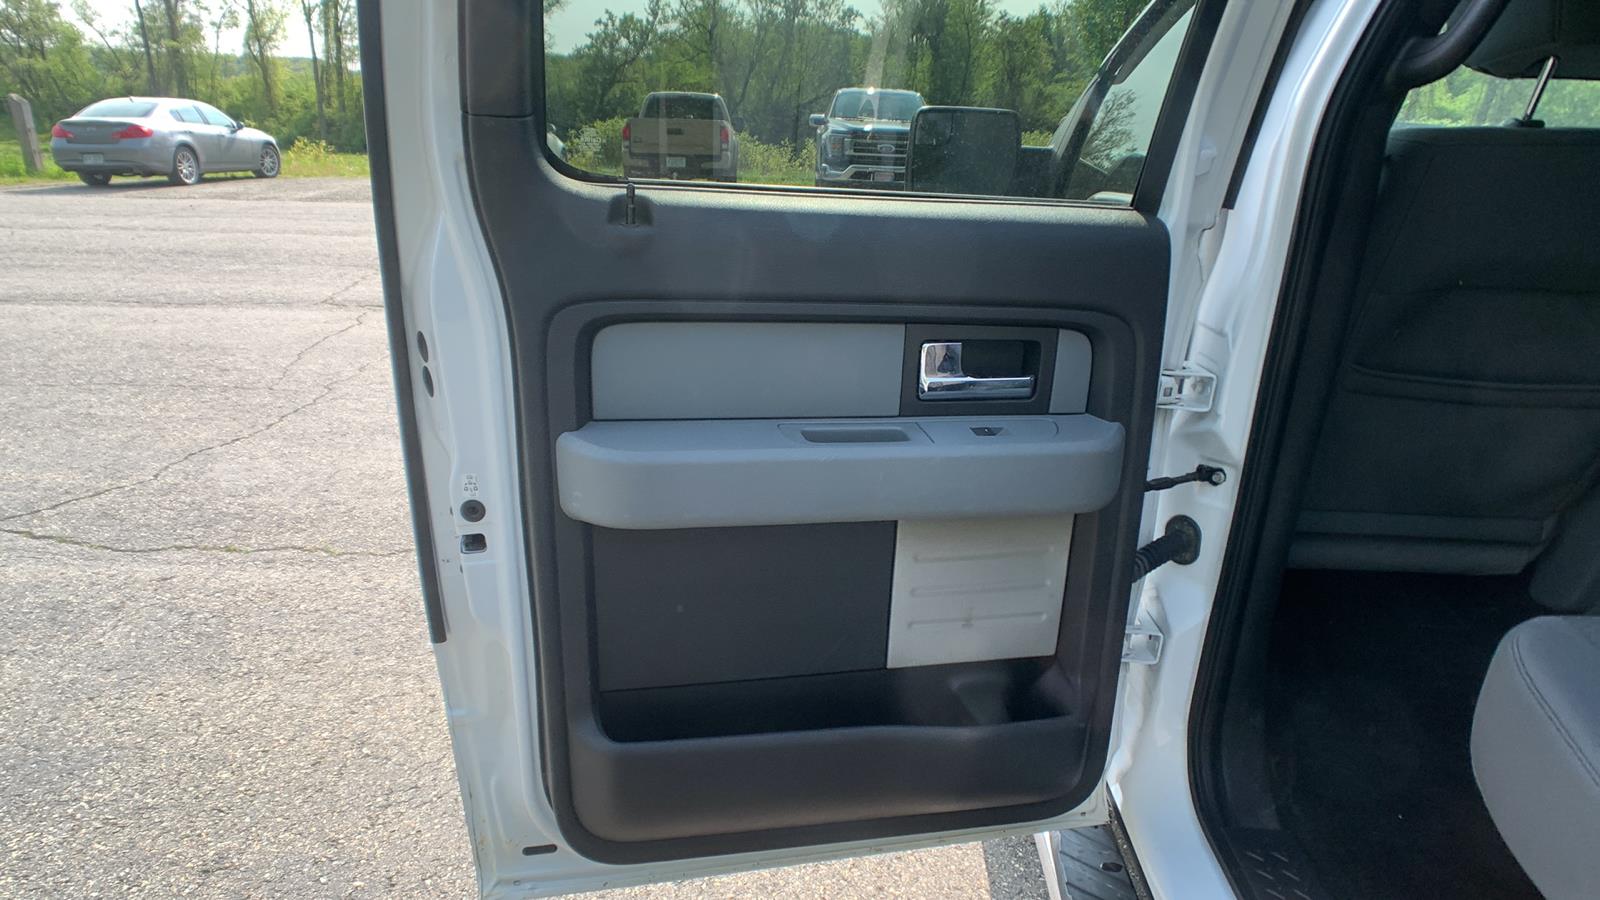 2013 Ford F-150 Short Bed,Crew Cab Pickup